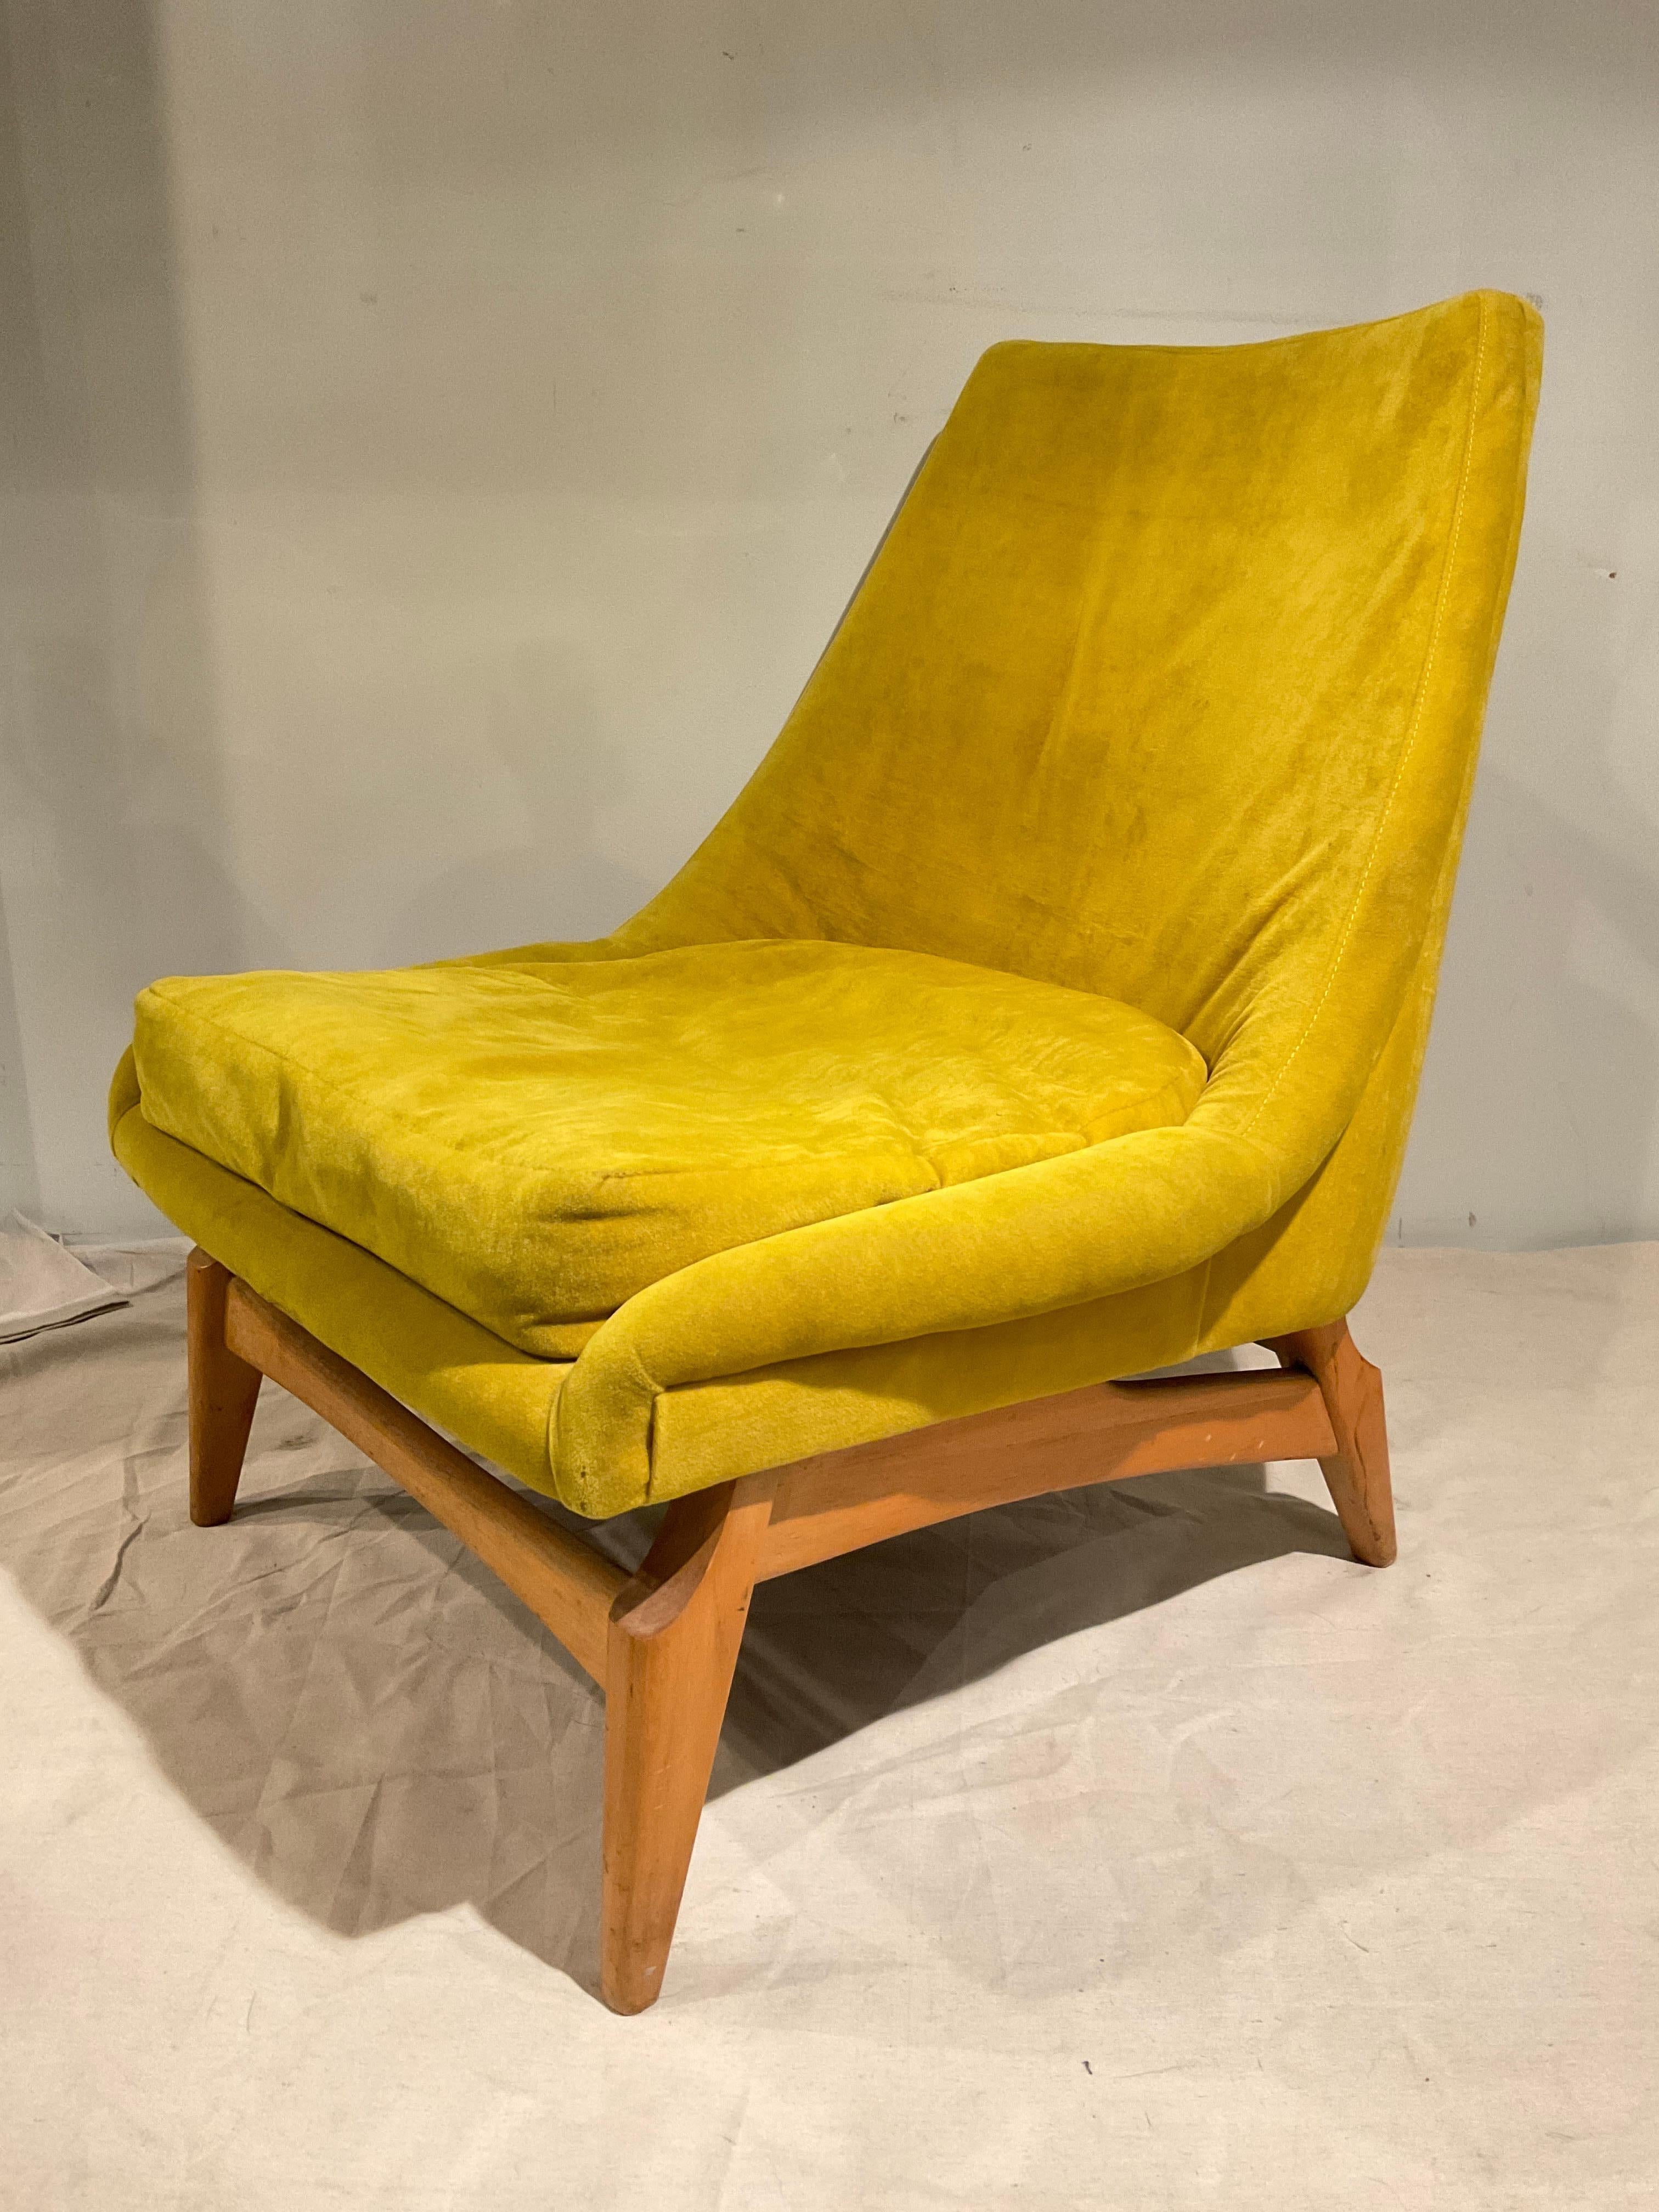 1950s Lounge chair. Needs reupholstering. Marks in finish on wood as seen in pictures.